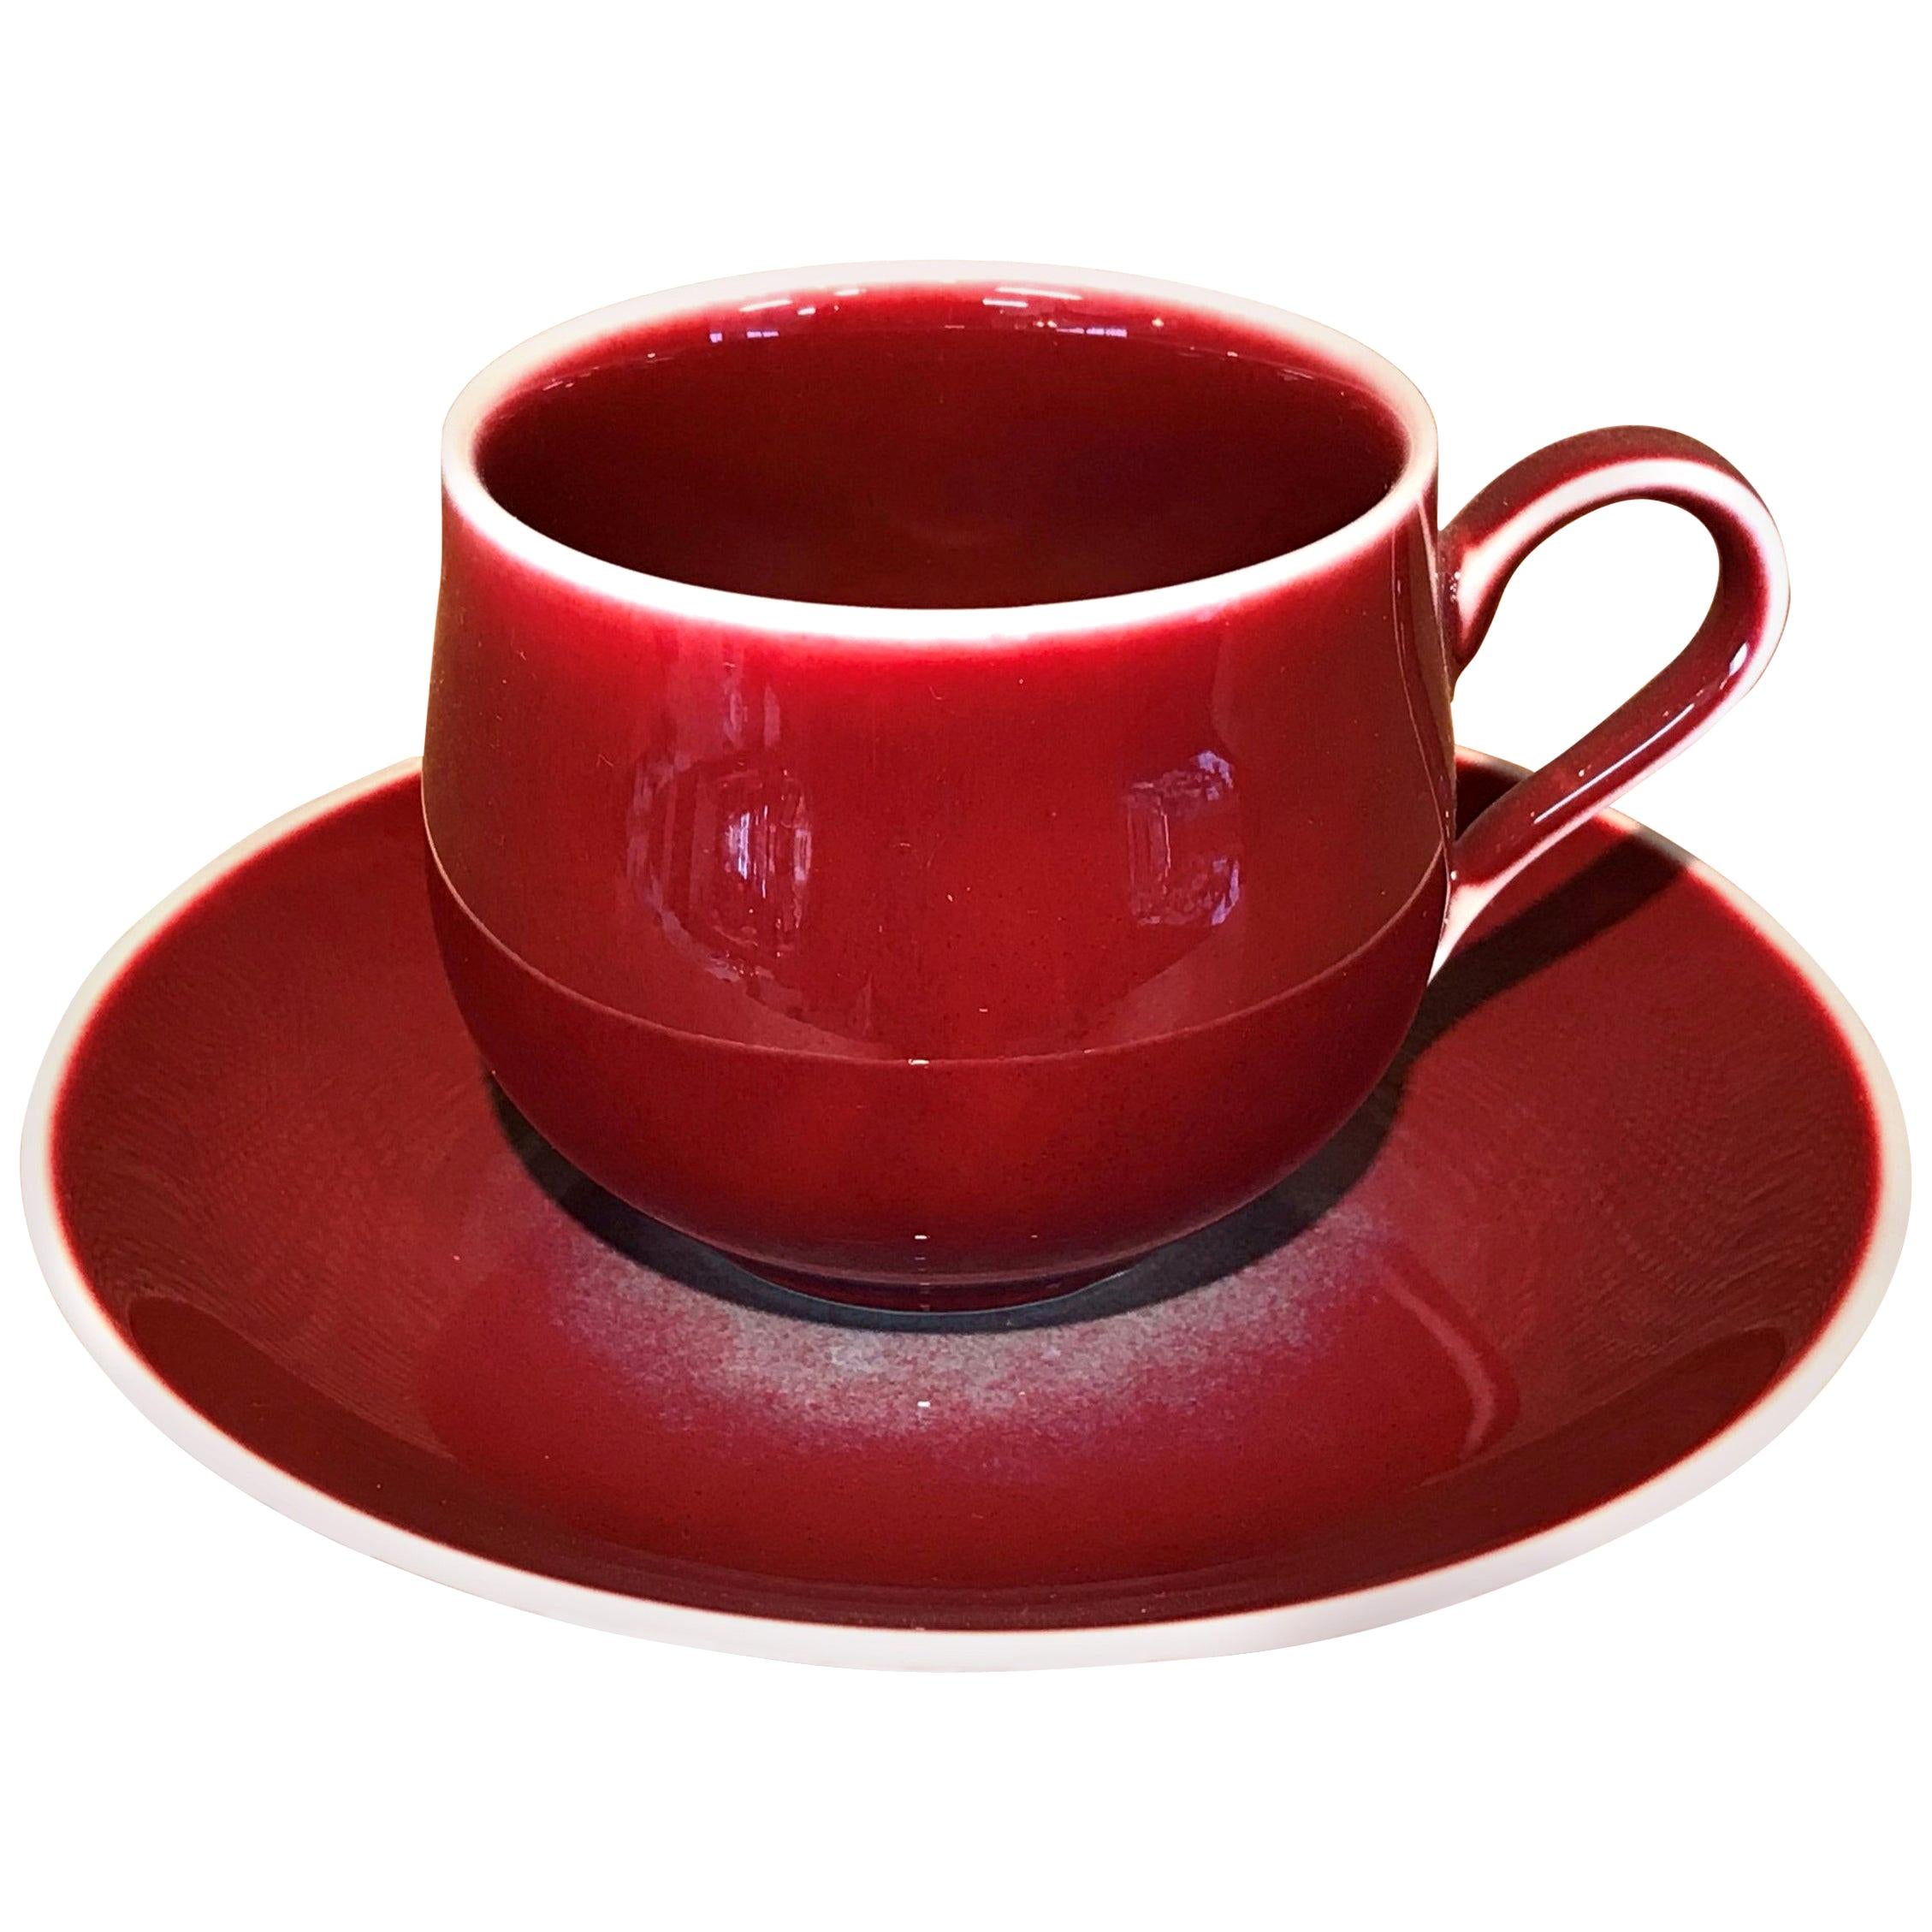 Japanese Red Hand-Glazed Porcelain Cup Saucer by Contemporary Master Artist